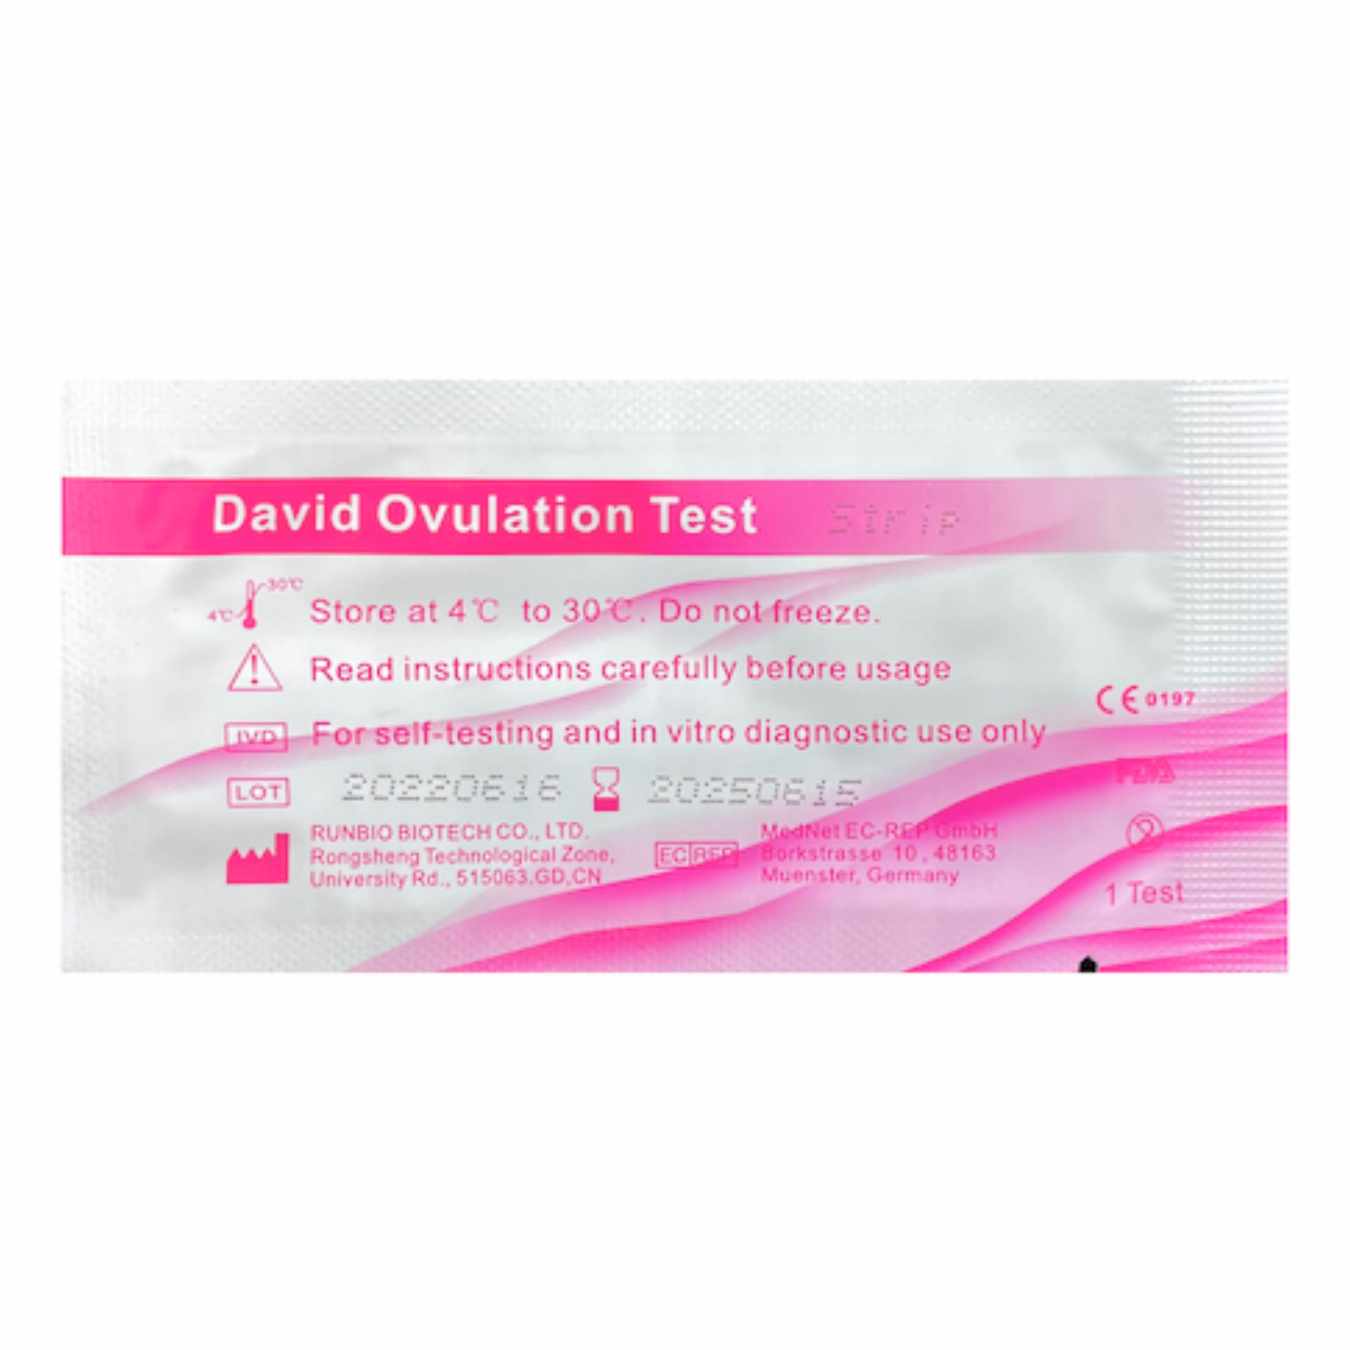 Ovulation Test Strip: A white plastic strip with pink indicator lines used for tracking fertility and predicting ovulation.